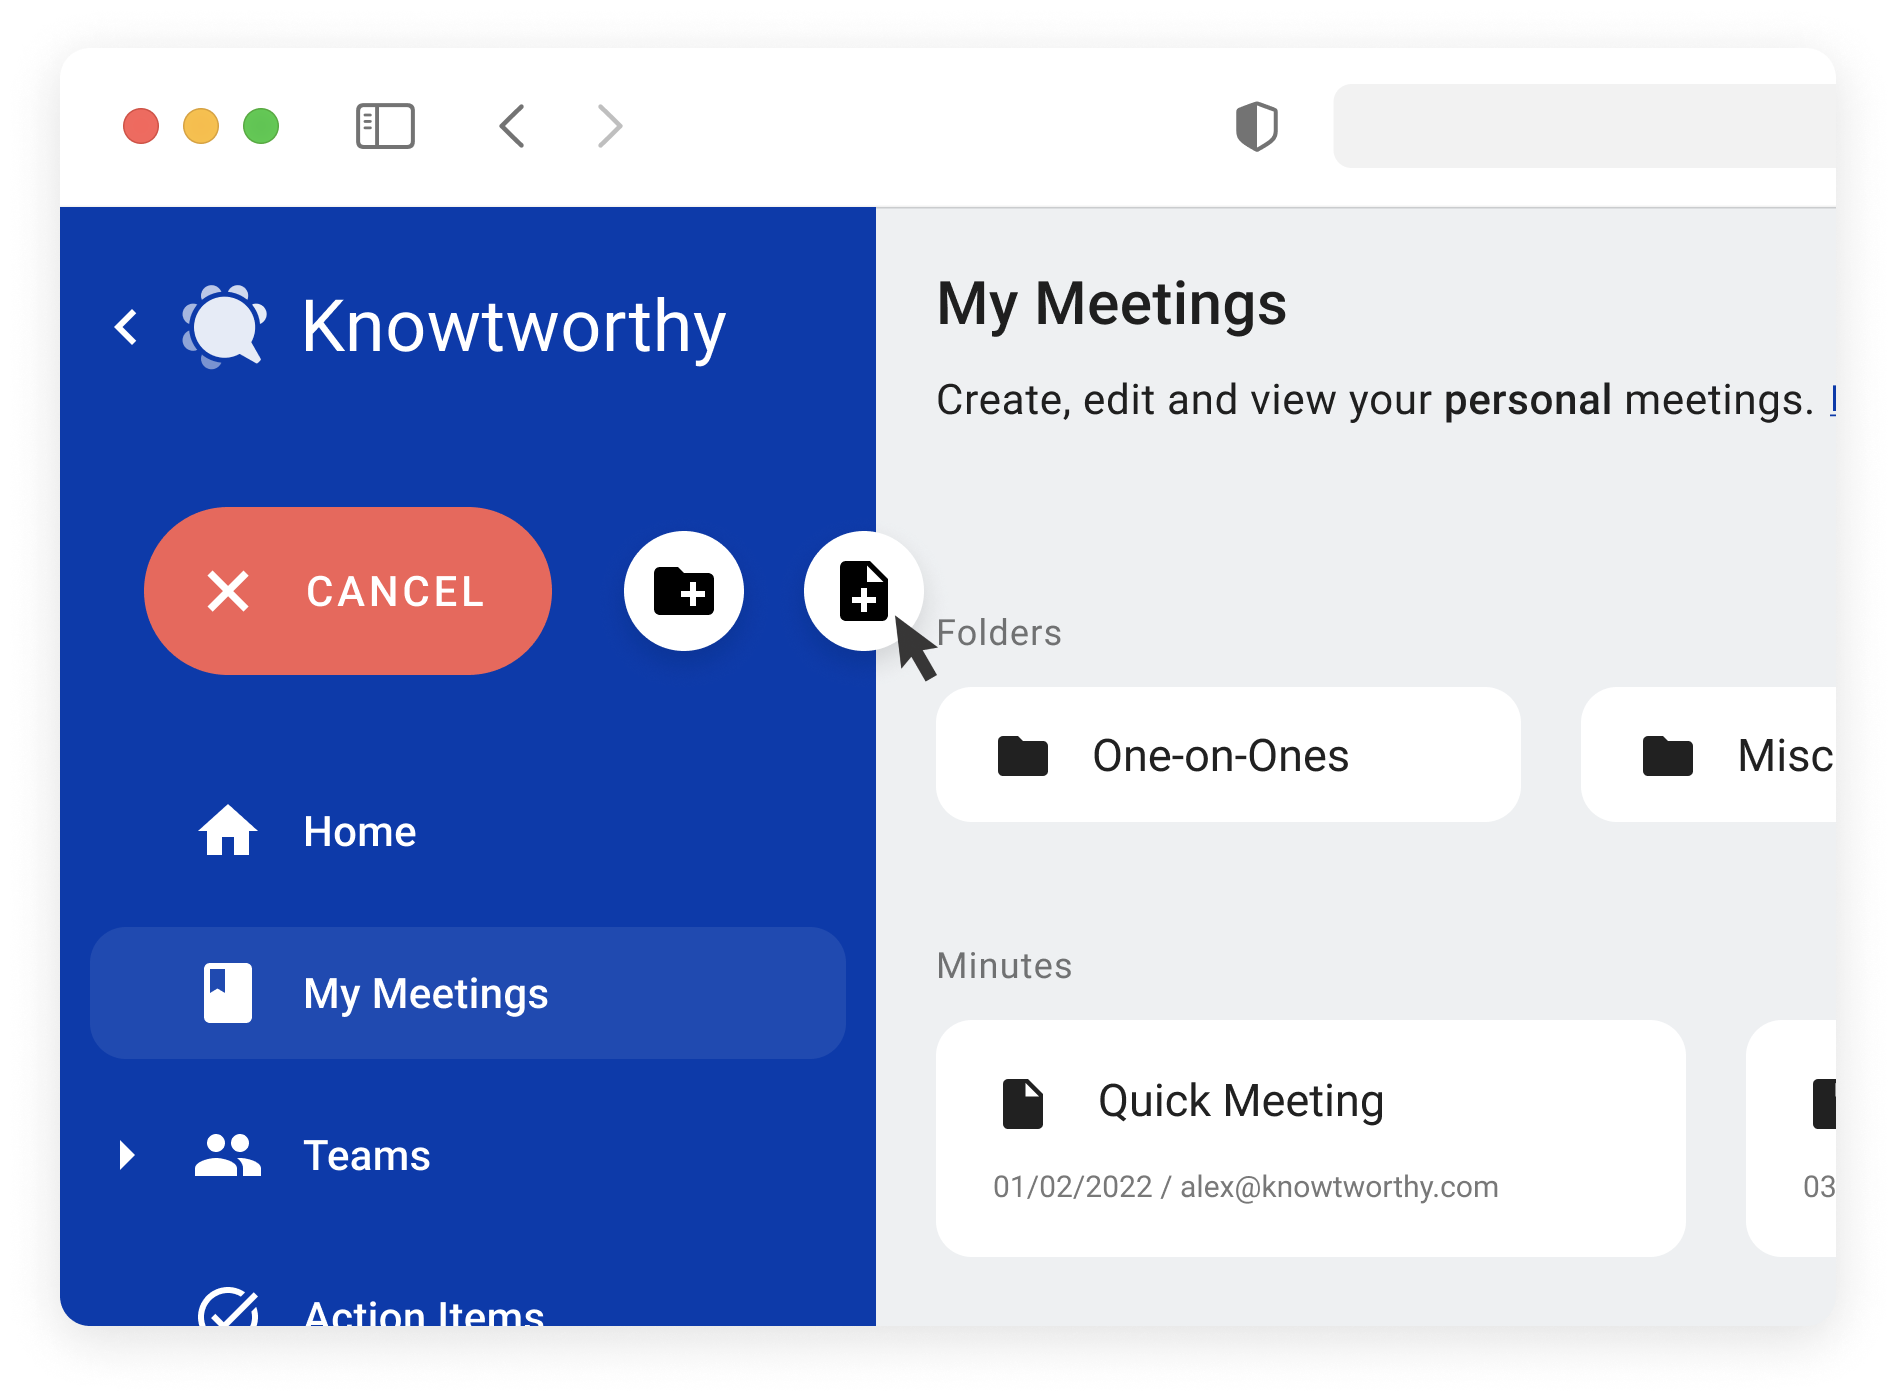 How to use the “My Meetings” Page